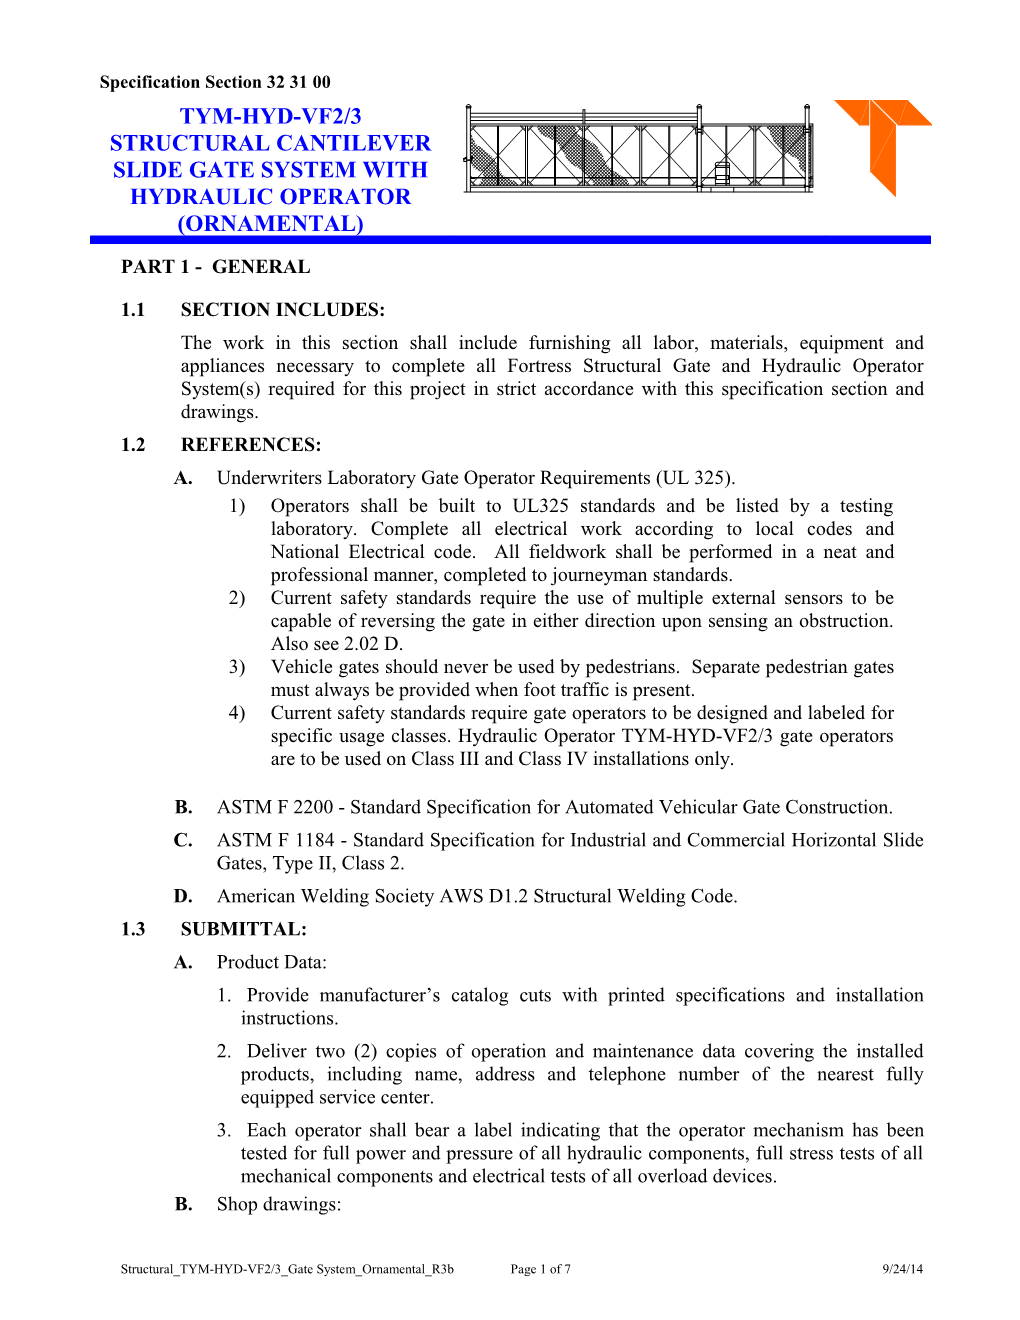 A.Underwriters Laboratory Gate Operator Requirements (UL 325)